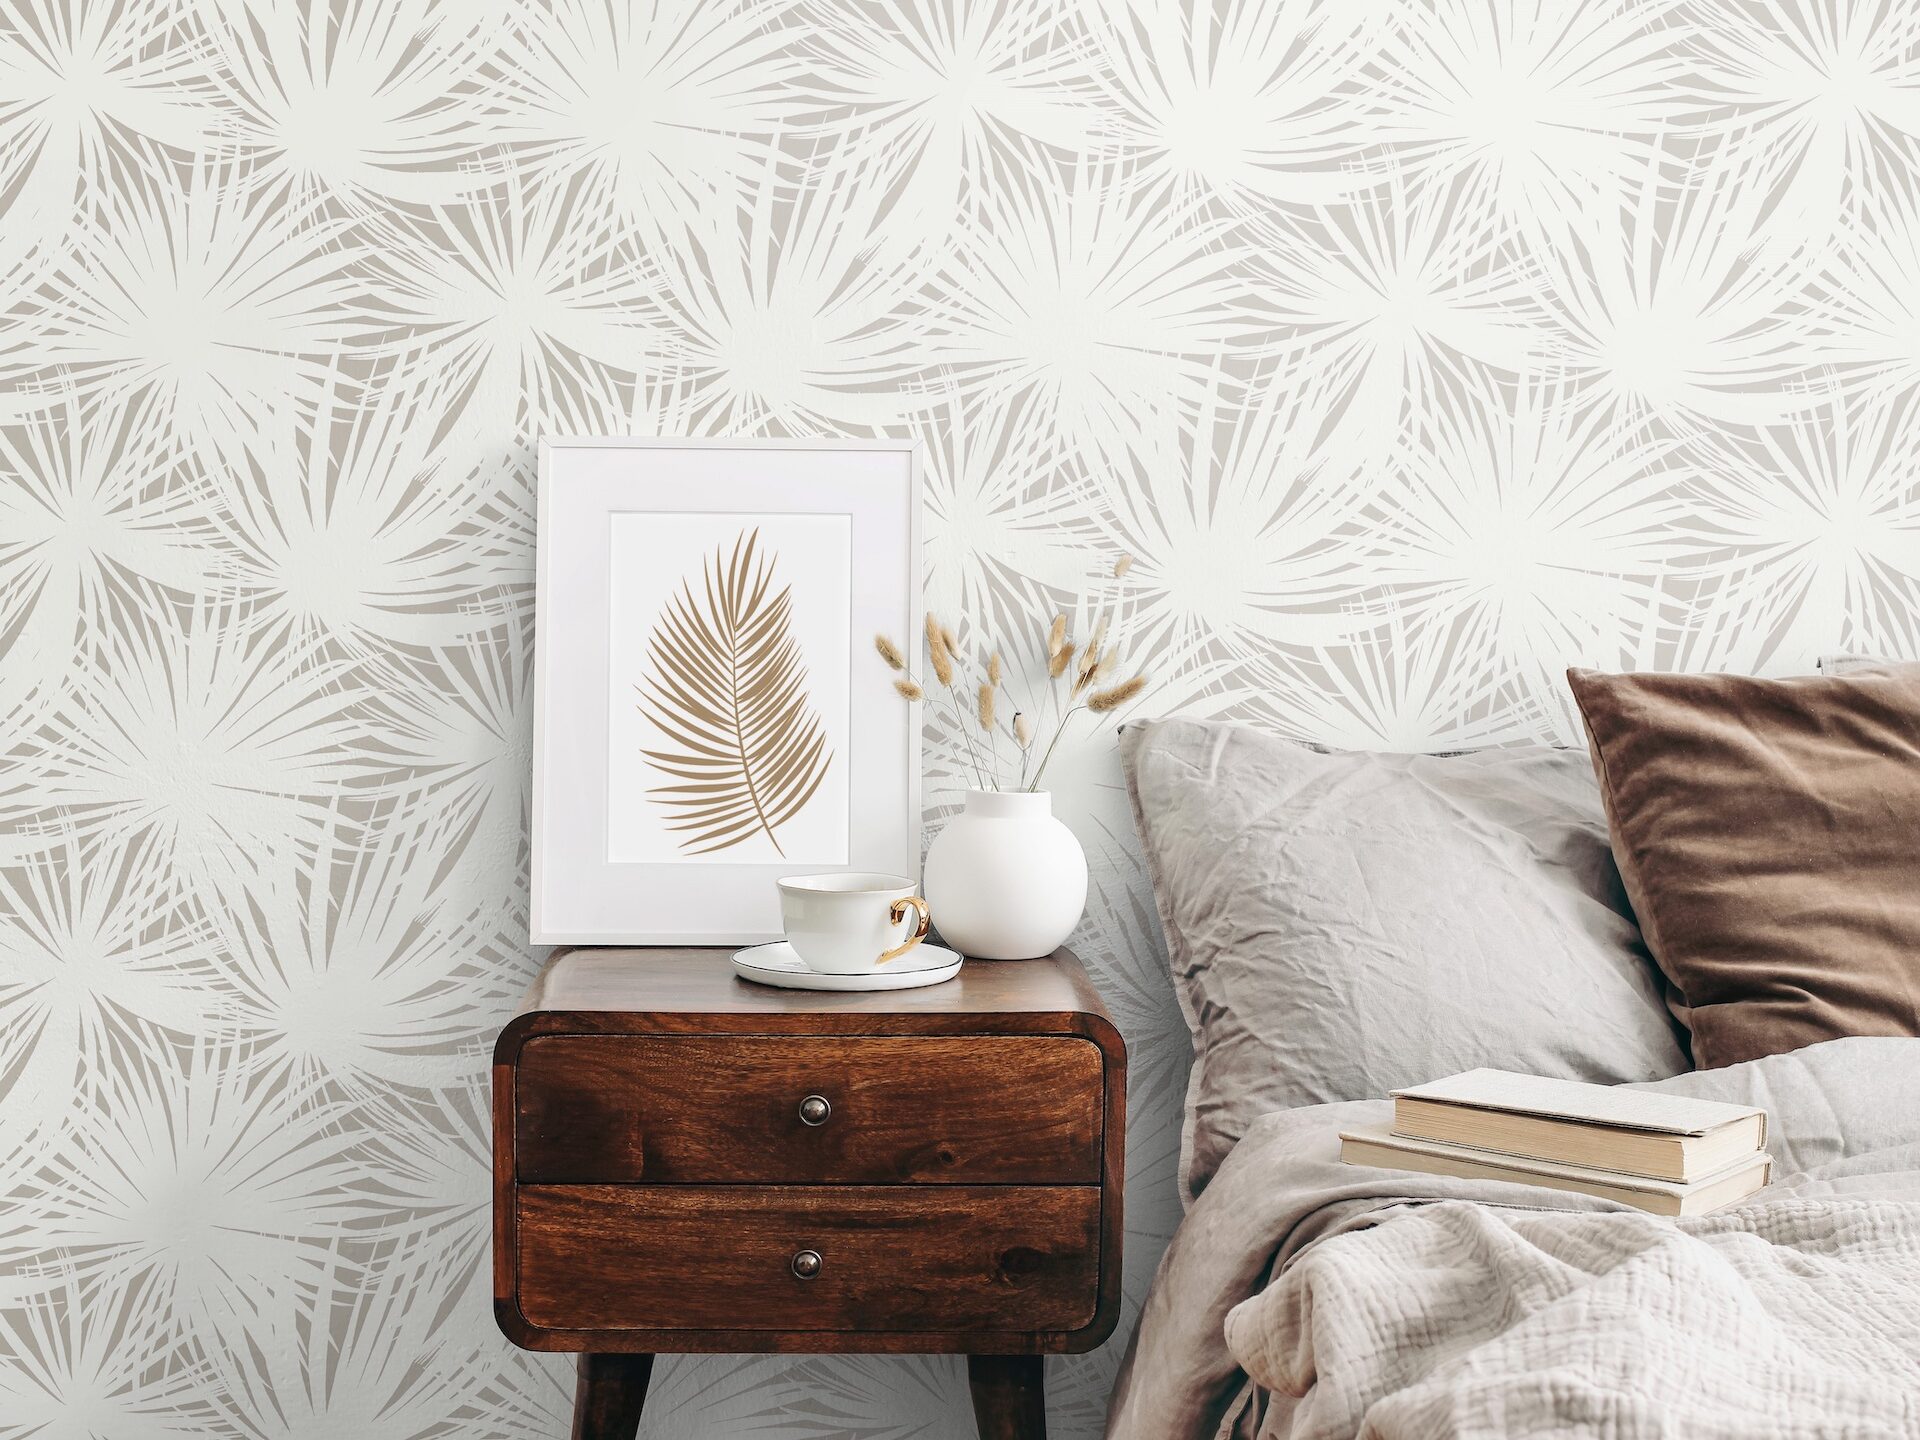 Palm wallpaper. White frame mockup on retro wooden bedside table. Modern white ceramic vase with dry Lagurus ovatus grass and cup of coffee. Beige linen and velvet pillows in bedroom, Scandinavian interior.